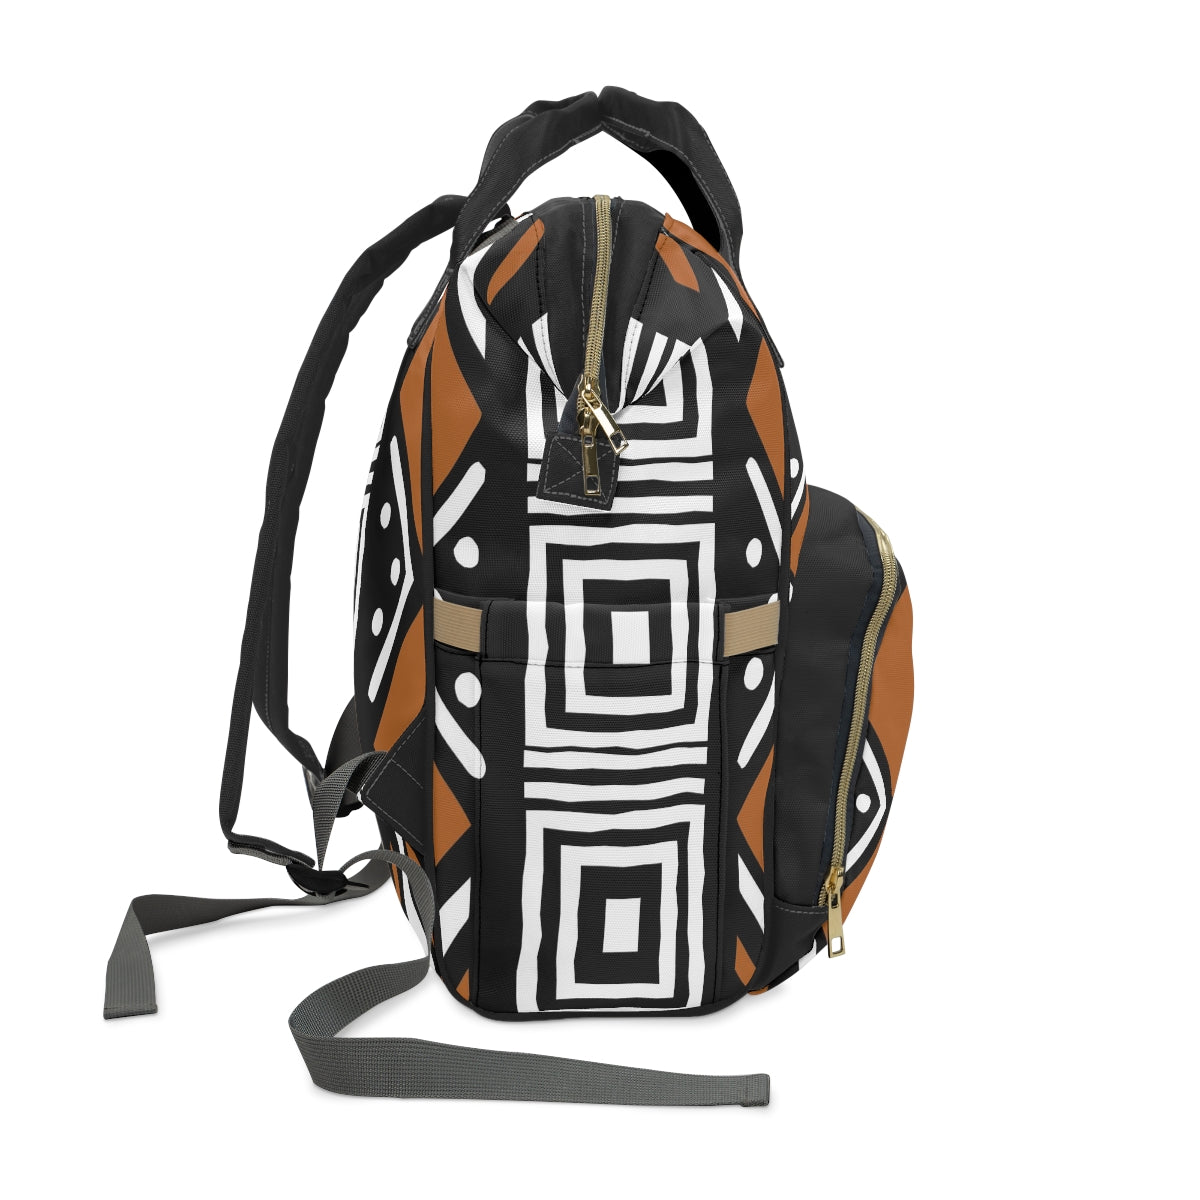 Mudcloth Abstract Light and Mud Brown Diaper Backpack